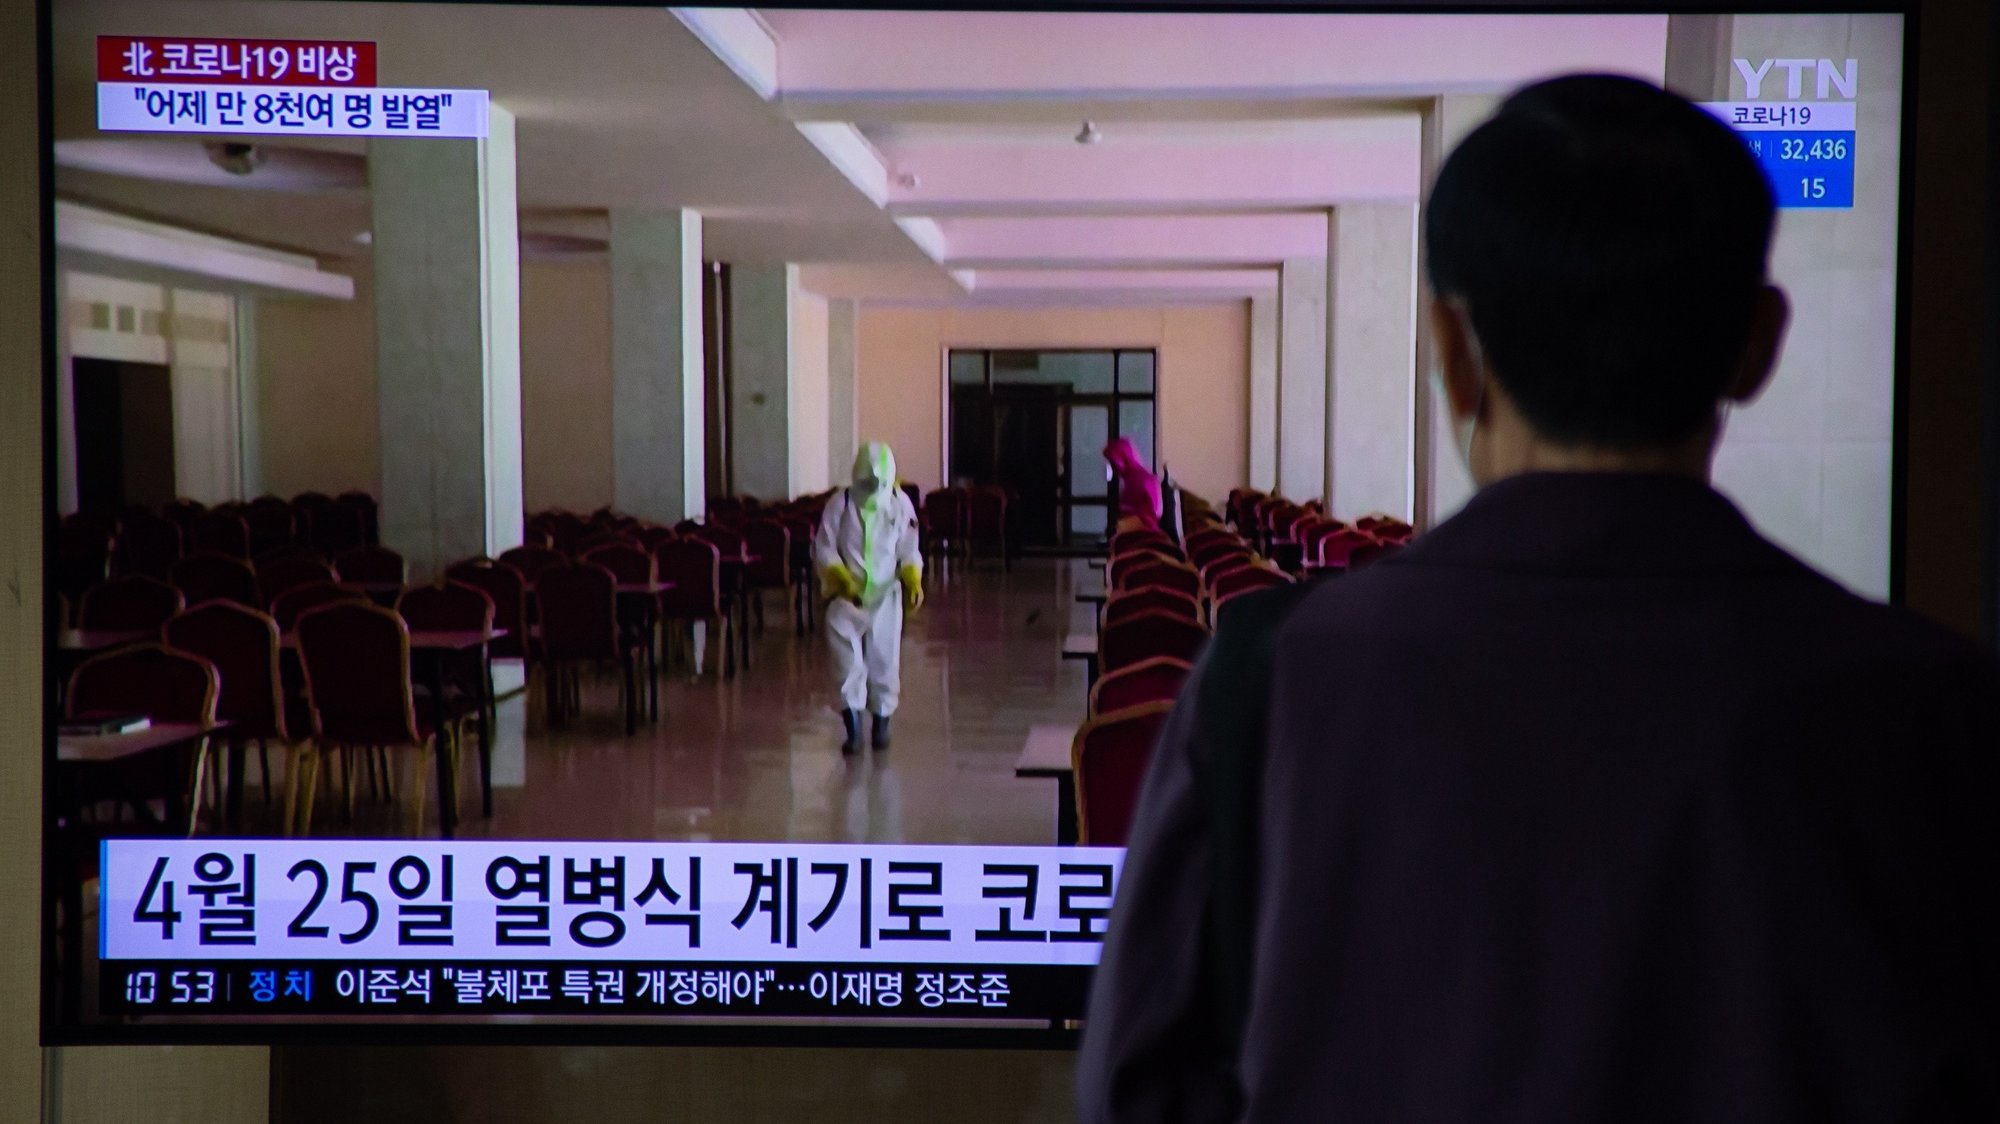 epa09943649 A man watches a news report on a COVID-19 outbreak in North Korea, at a station in Seoul, South Korea, 13 May 2022. The North Korean state media agency (KCNA) announced an outbreak of COVID-19 in the country. A nation-wide lockdown was instituted in response and On 13 May, the first COVID-19 related deaths were reported.  EPA/JEON HEON-KYUN